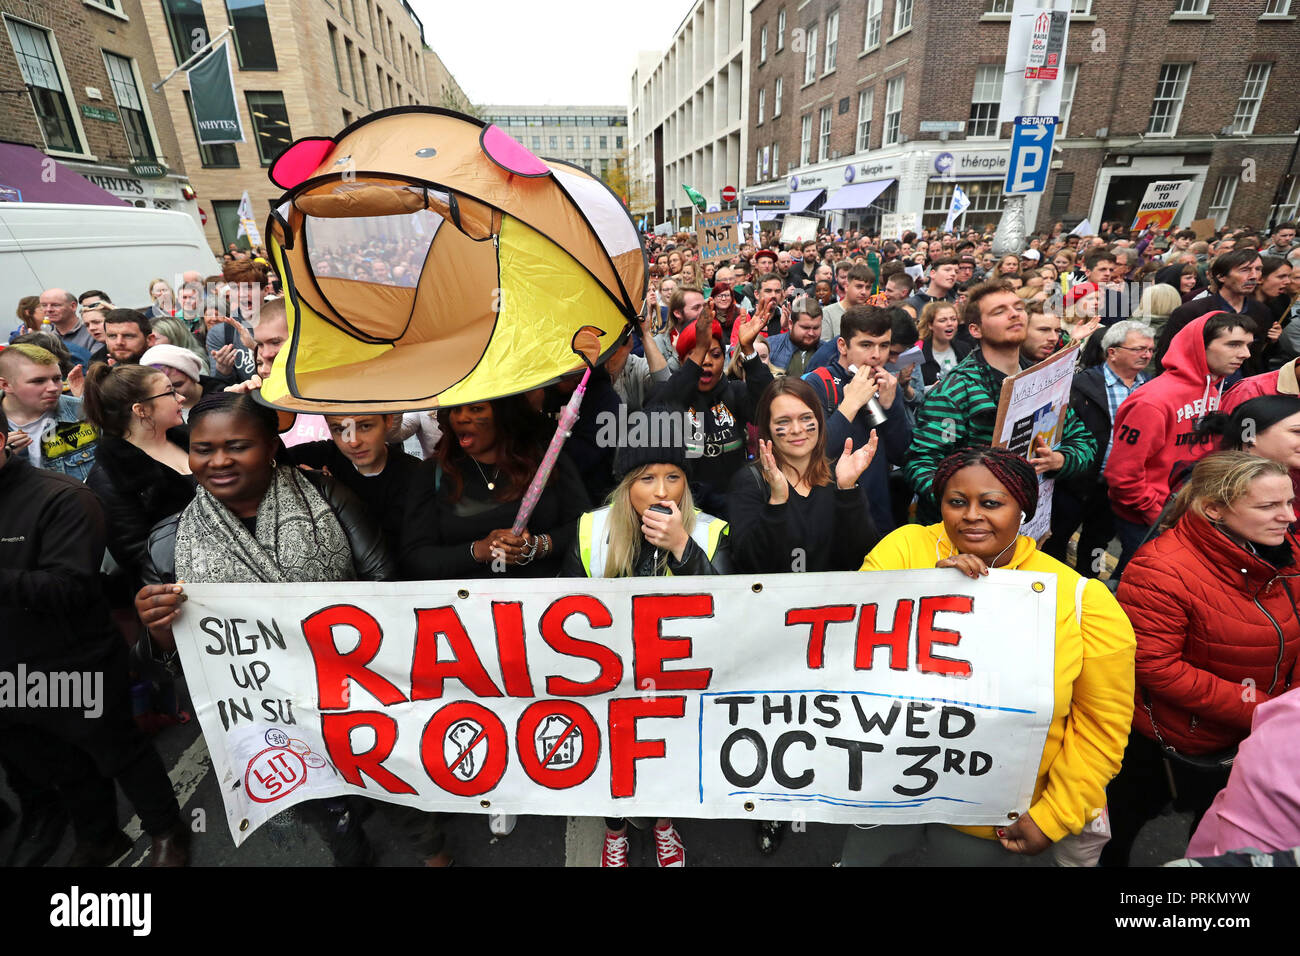 Crowds outside Leinster House in Dublin during a Raise the Roof housing rights protest. Stock Photo